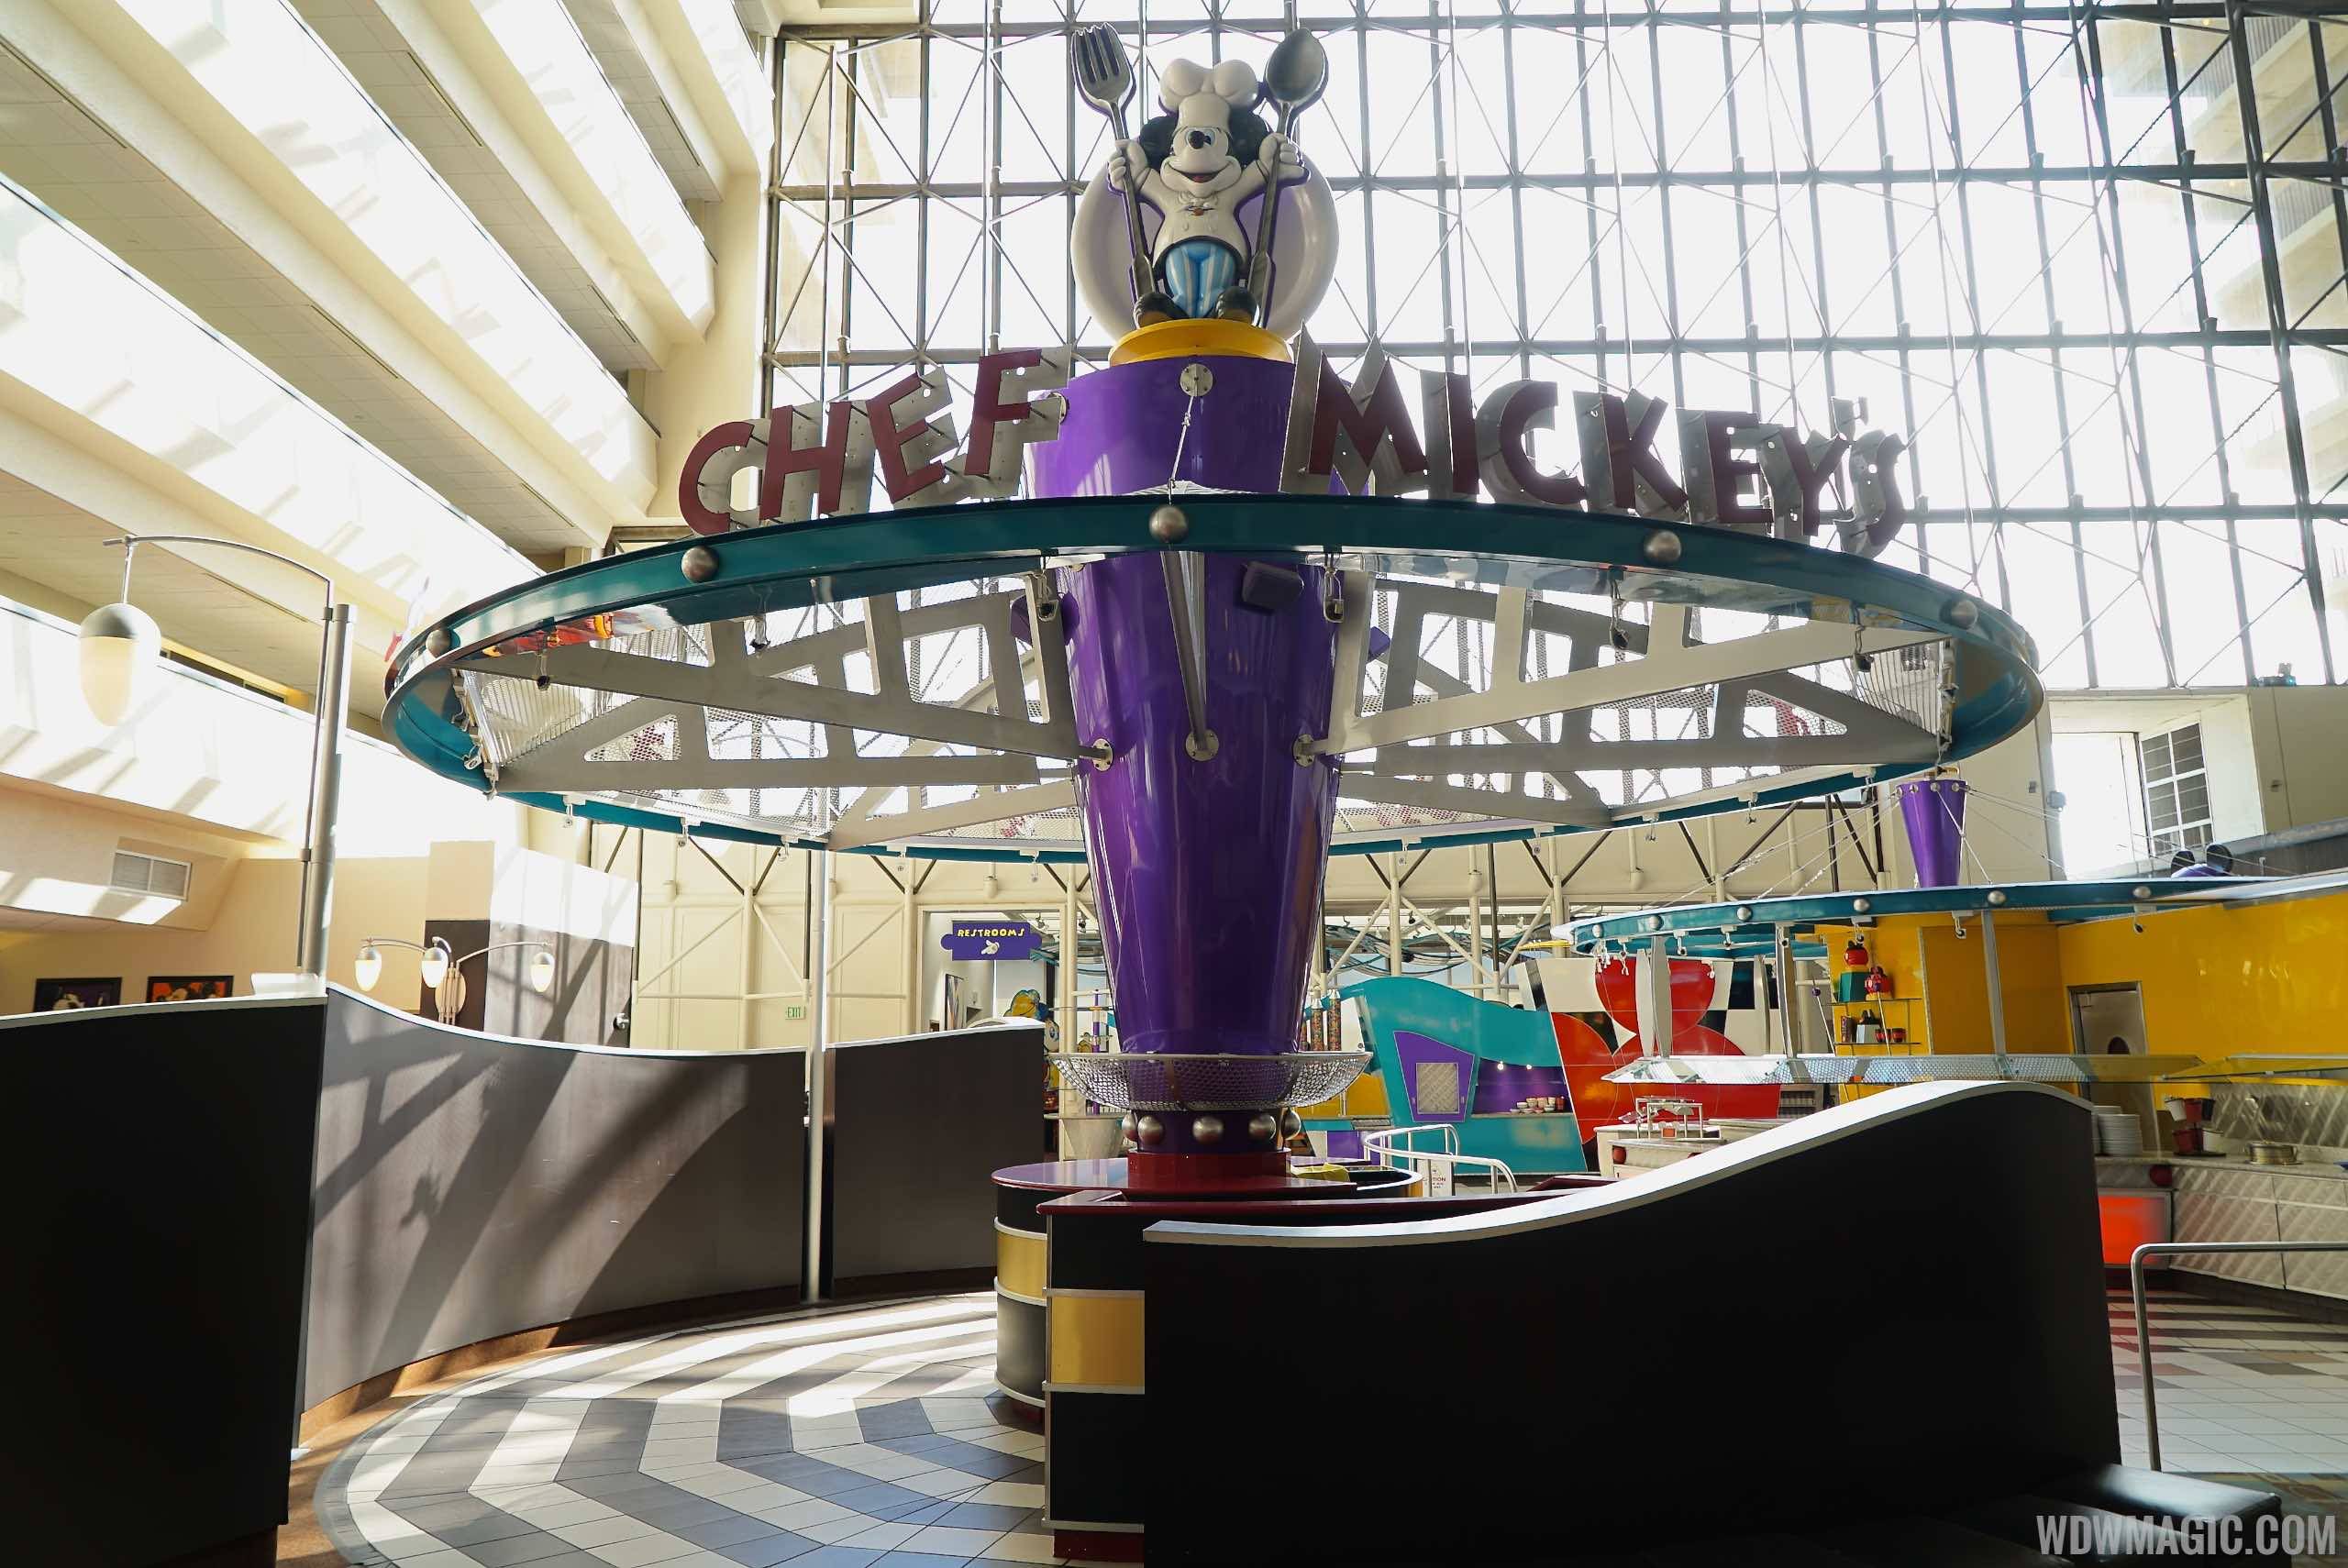 Chef Mickey's temporary relocation to the convention center is back on for the end of the year